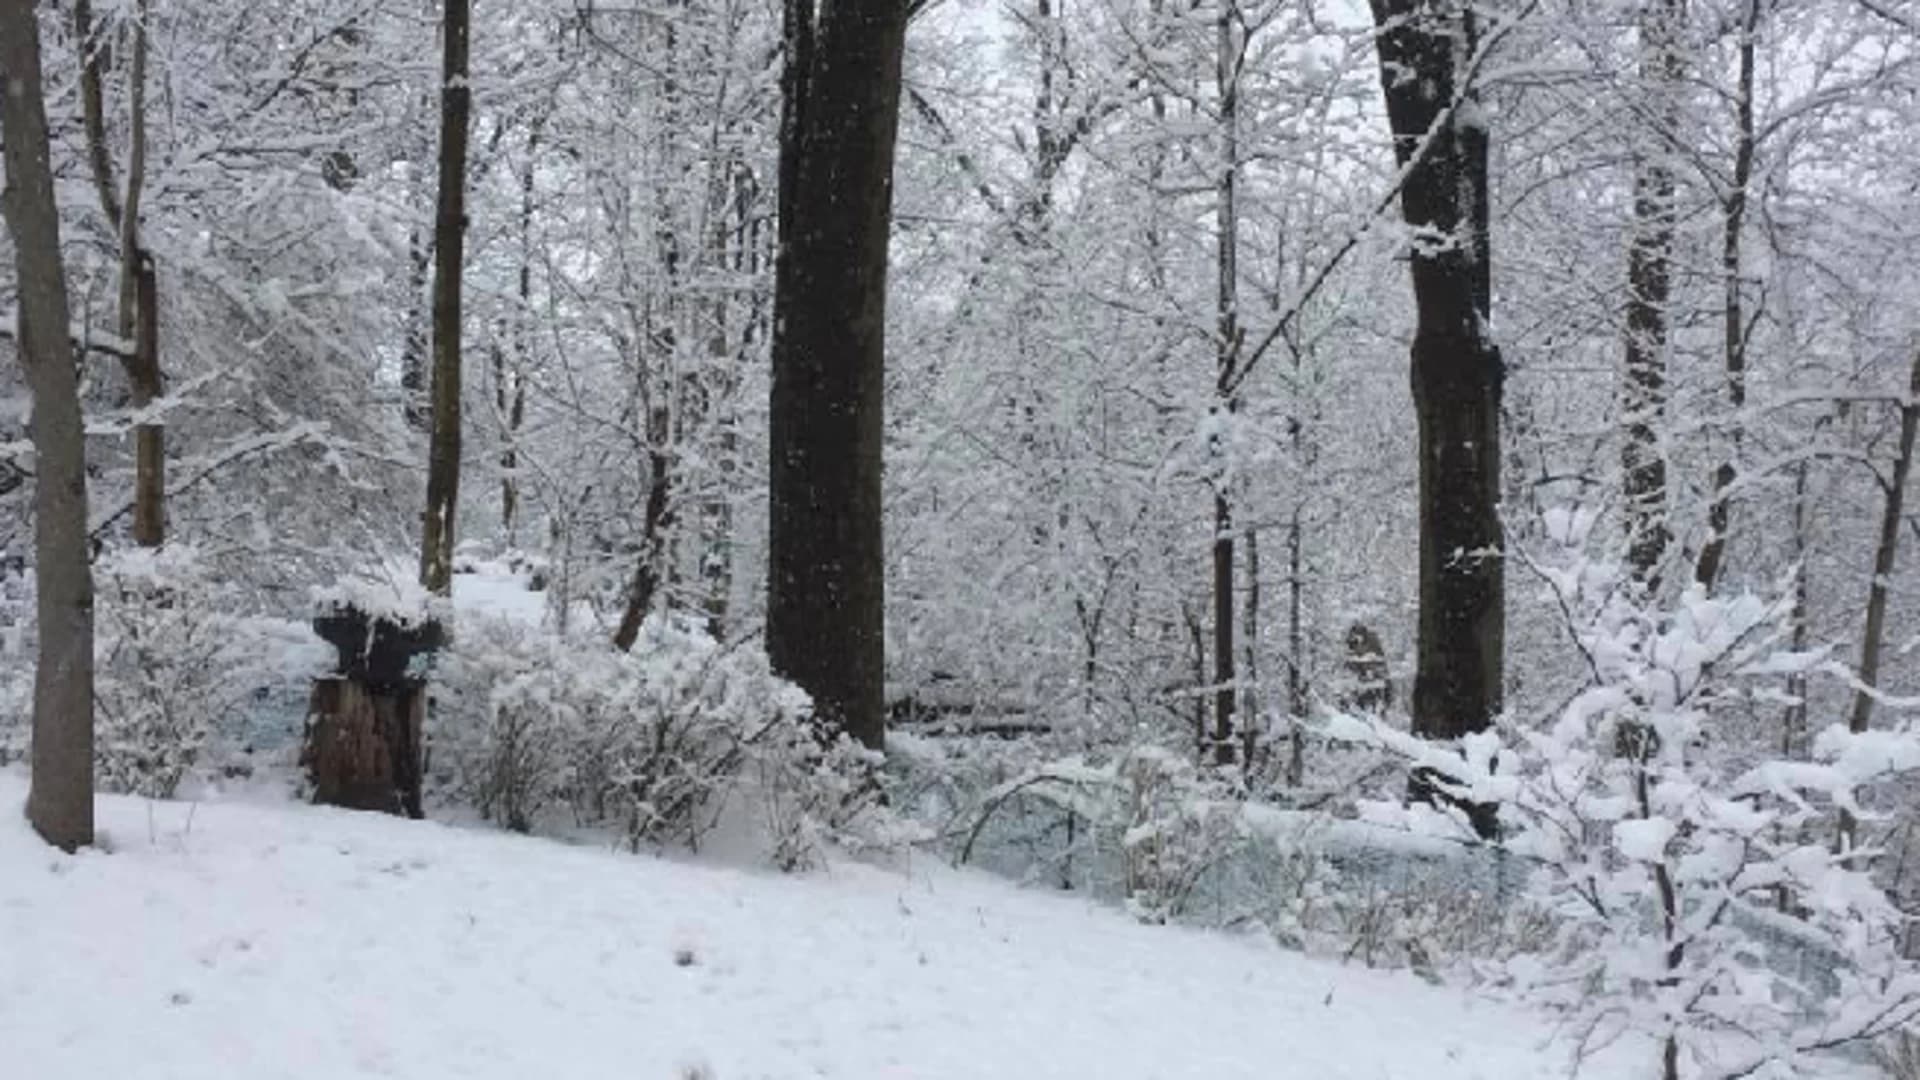 News 12's Most-Viewed: #8 - Hudson Valley avoids major hit from nor’easter